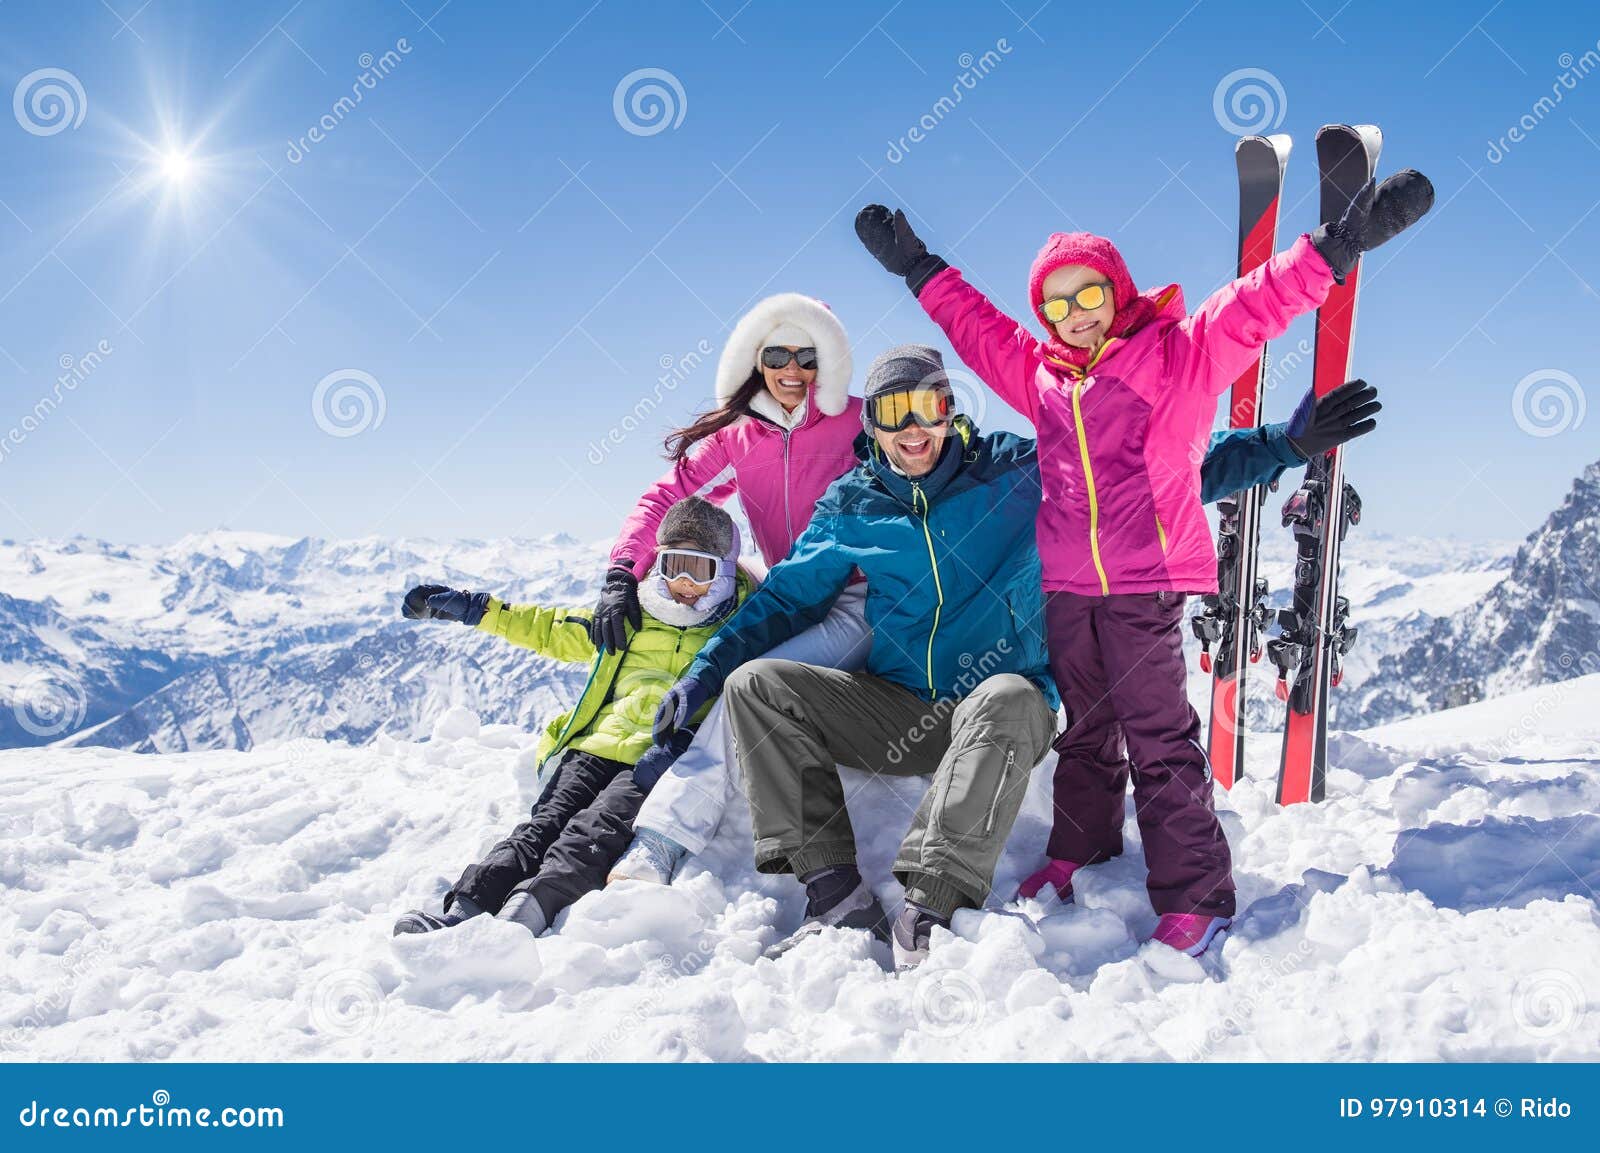 happy family in winter holiday